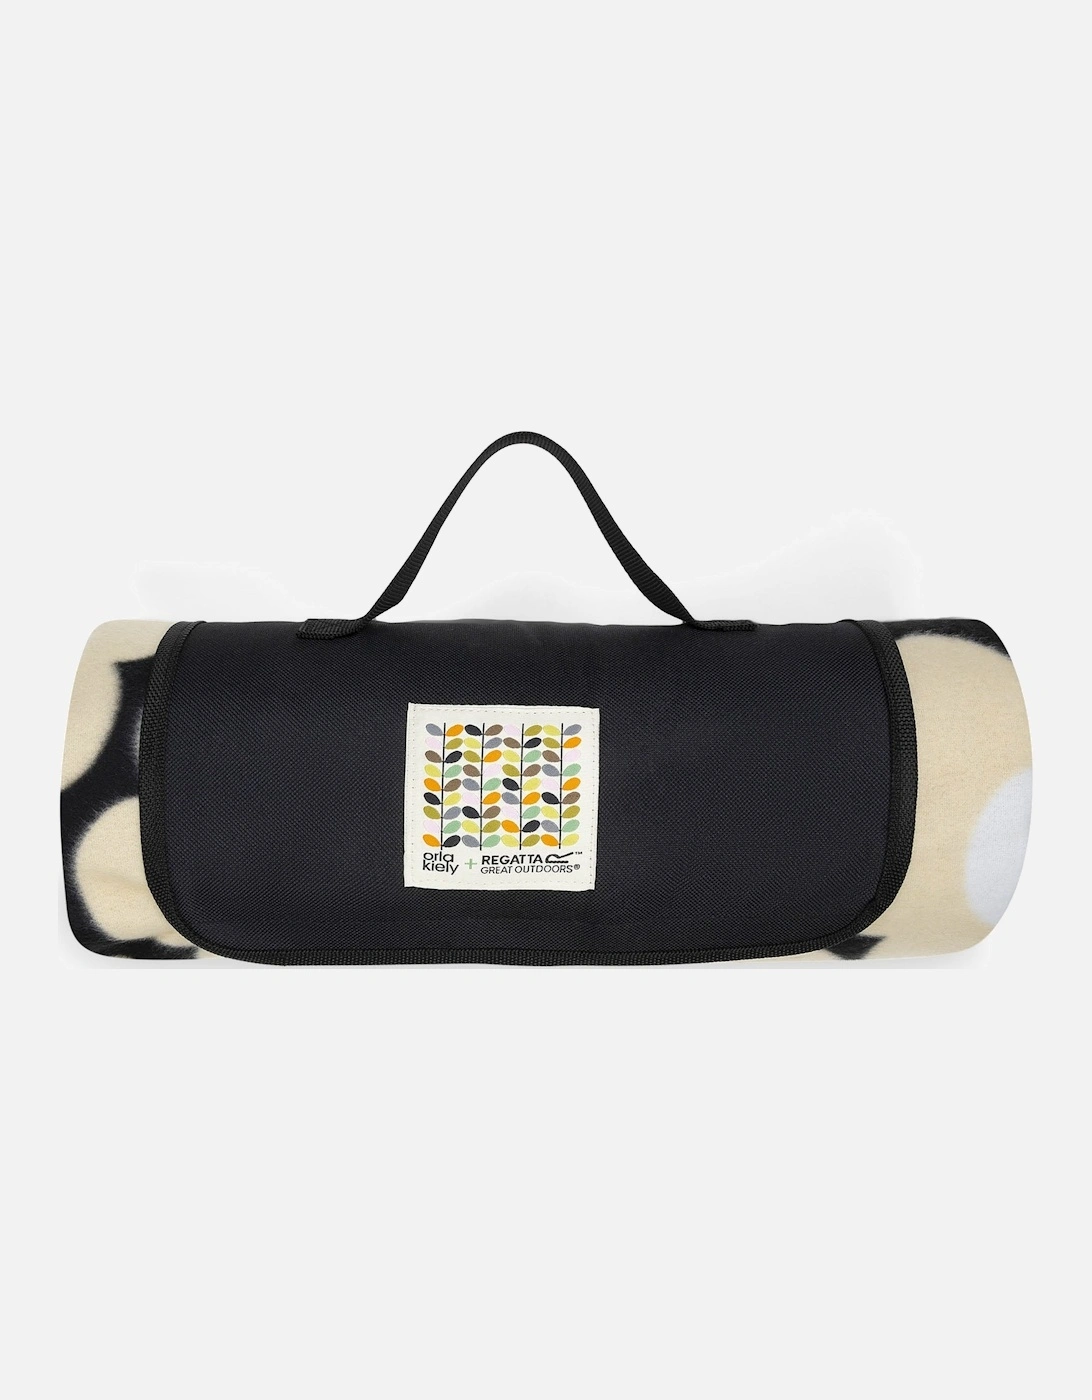 Orla Kiely Roll Away & Carry Camping Picnic Blanket Rug Mat